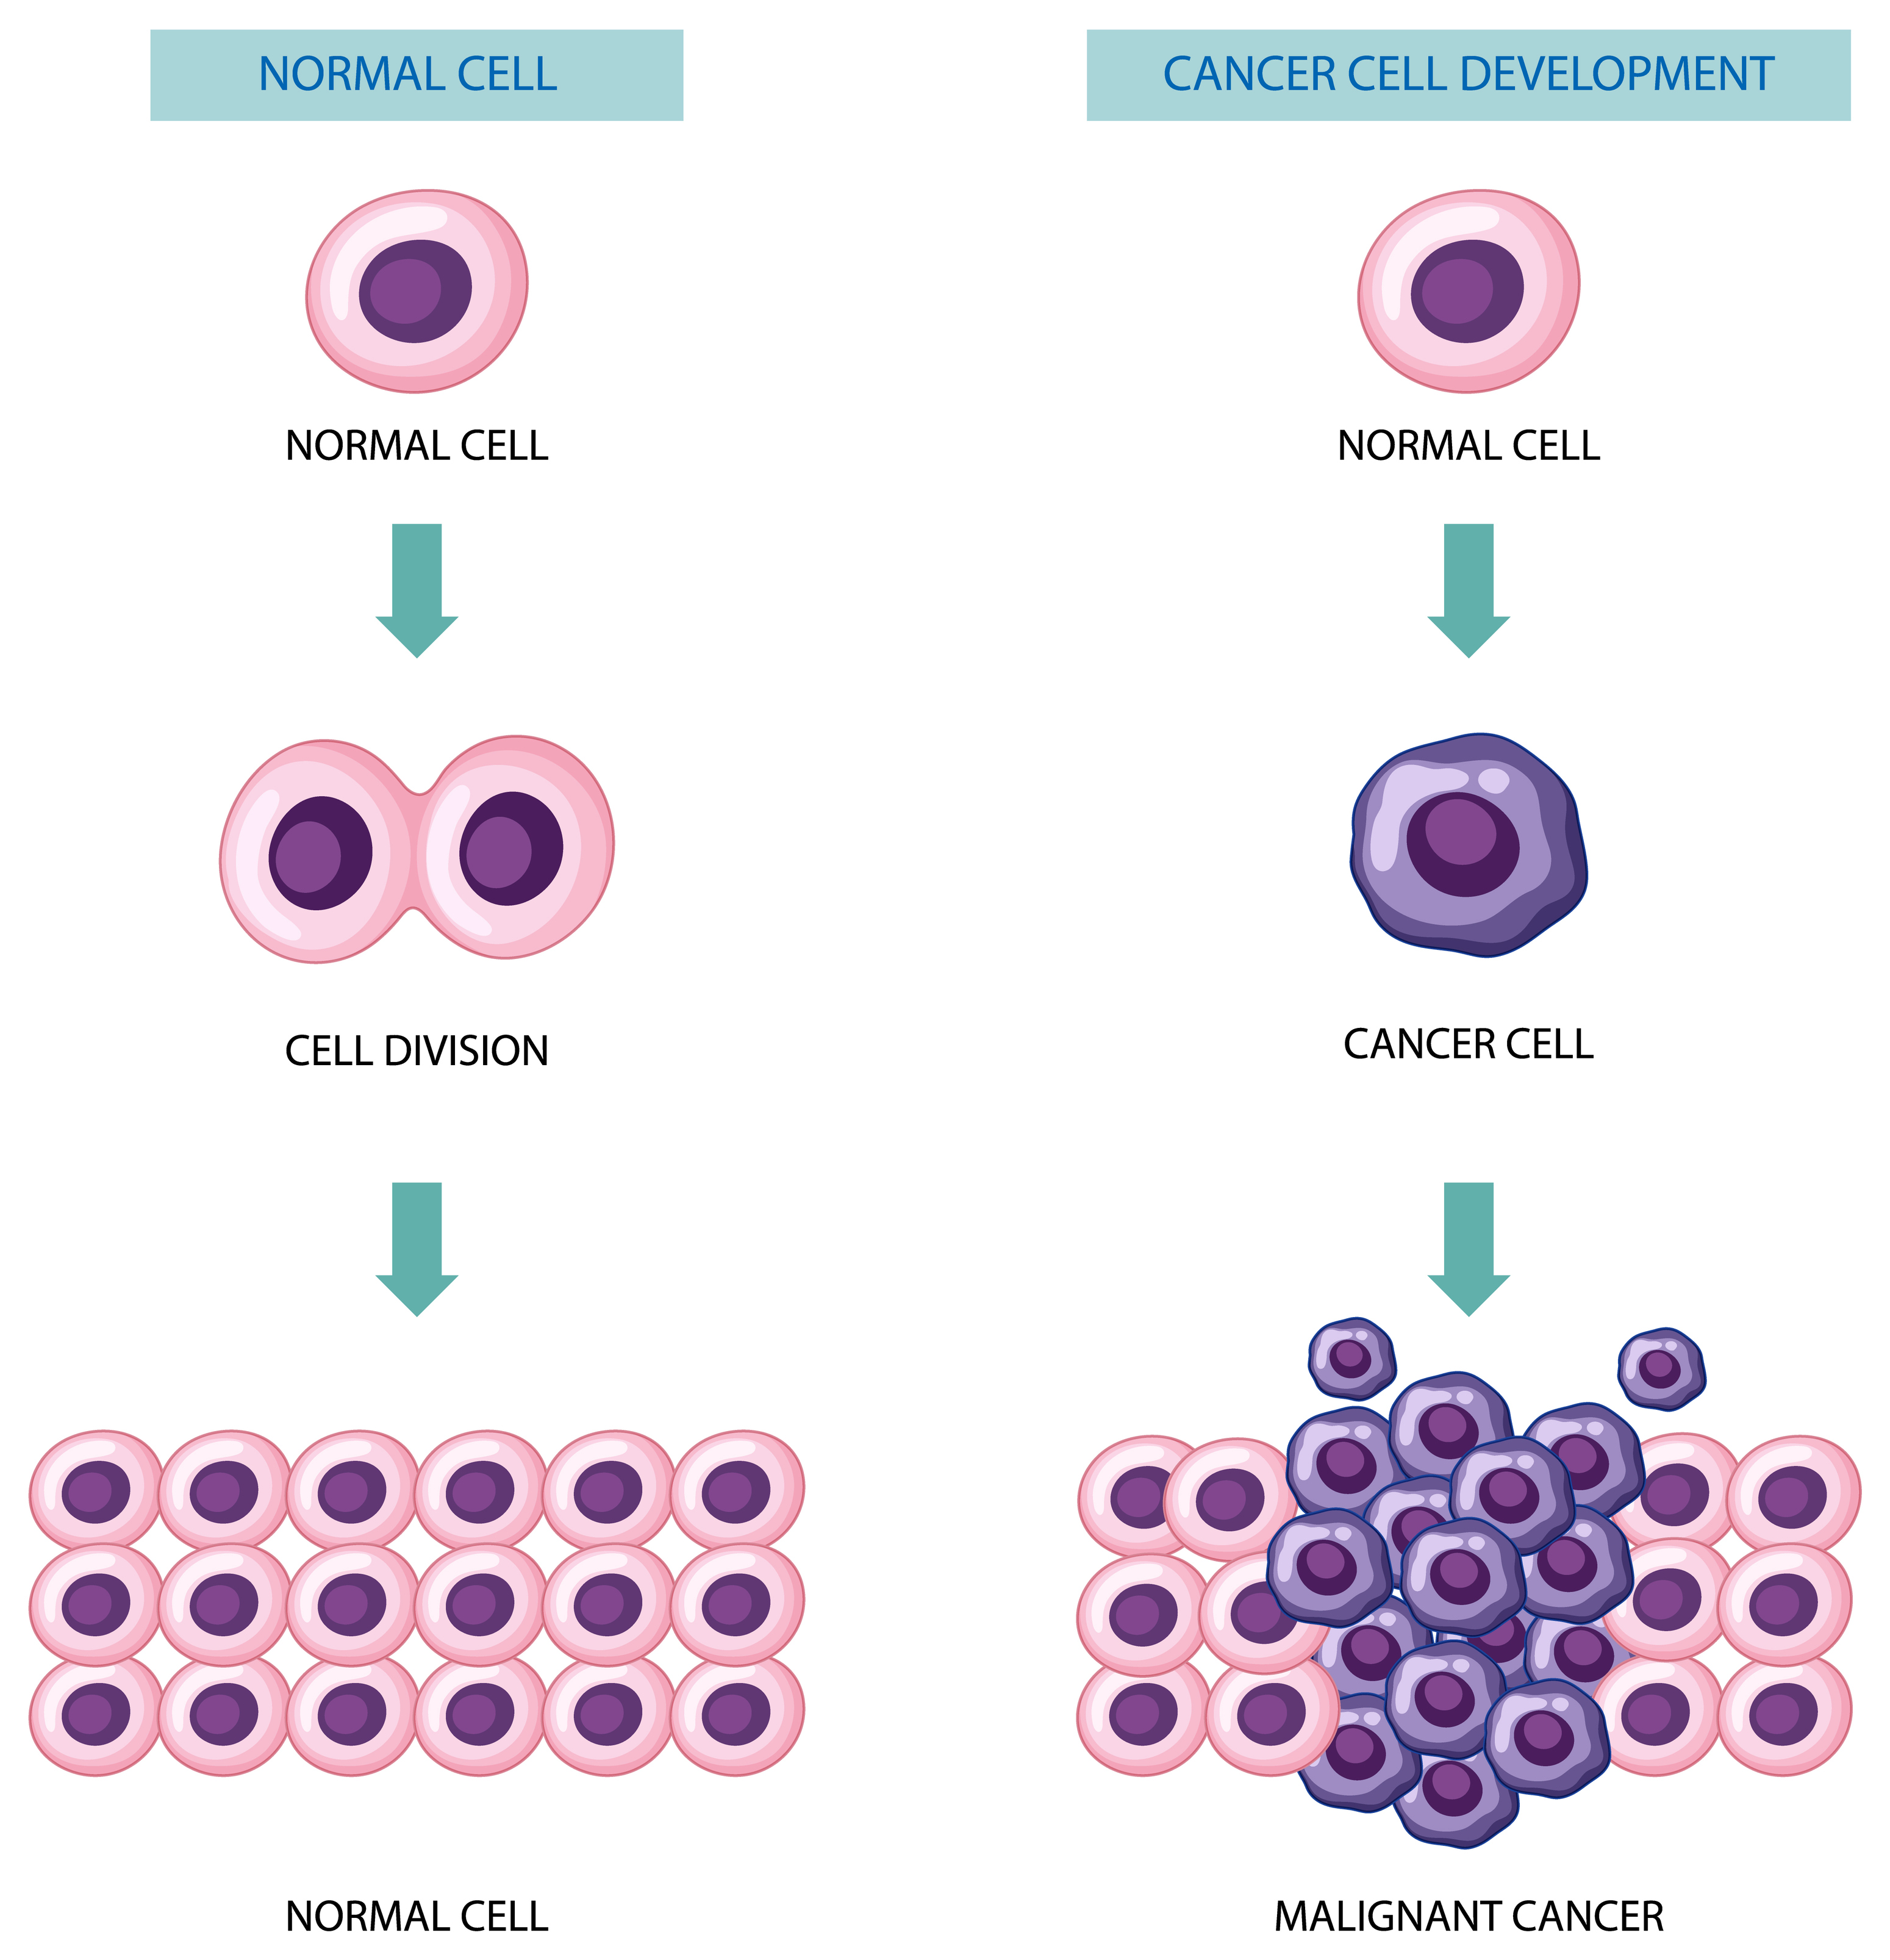 Normal cells and cancer cells